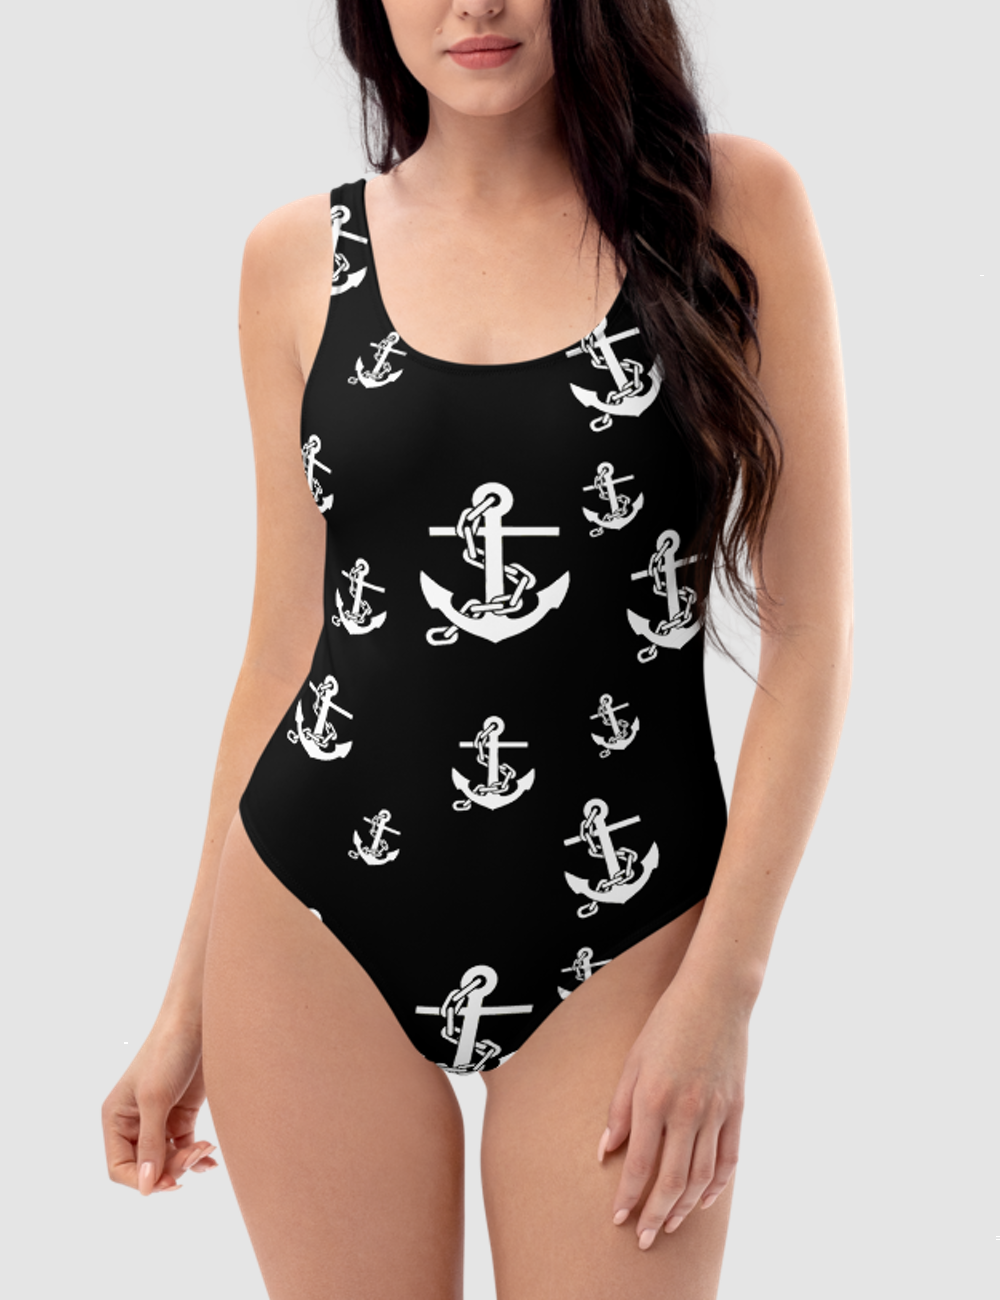 Chained Sea Anchors | Women's One-Piece Swimsuit OniTakai